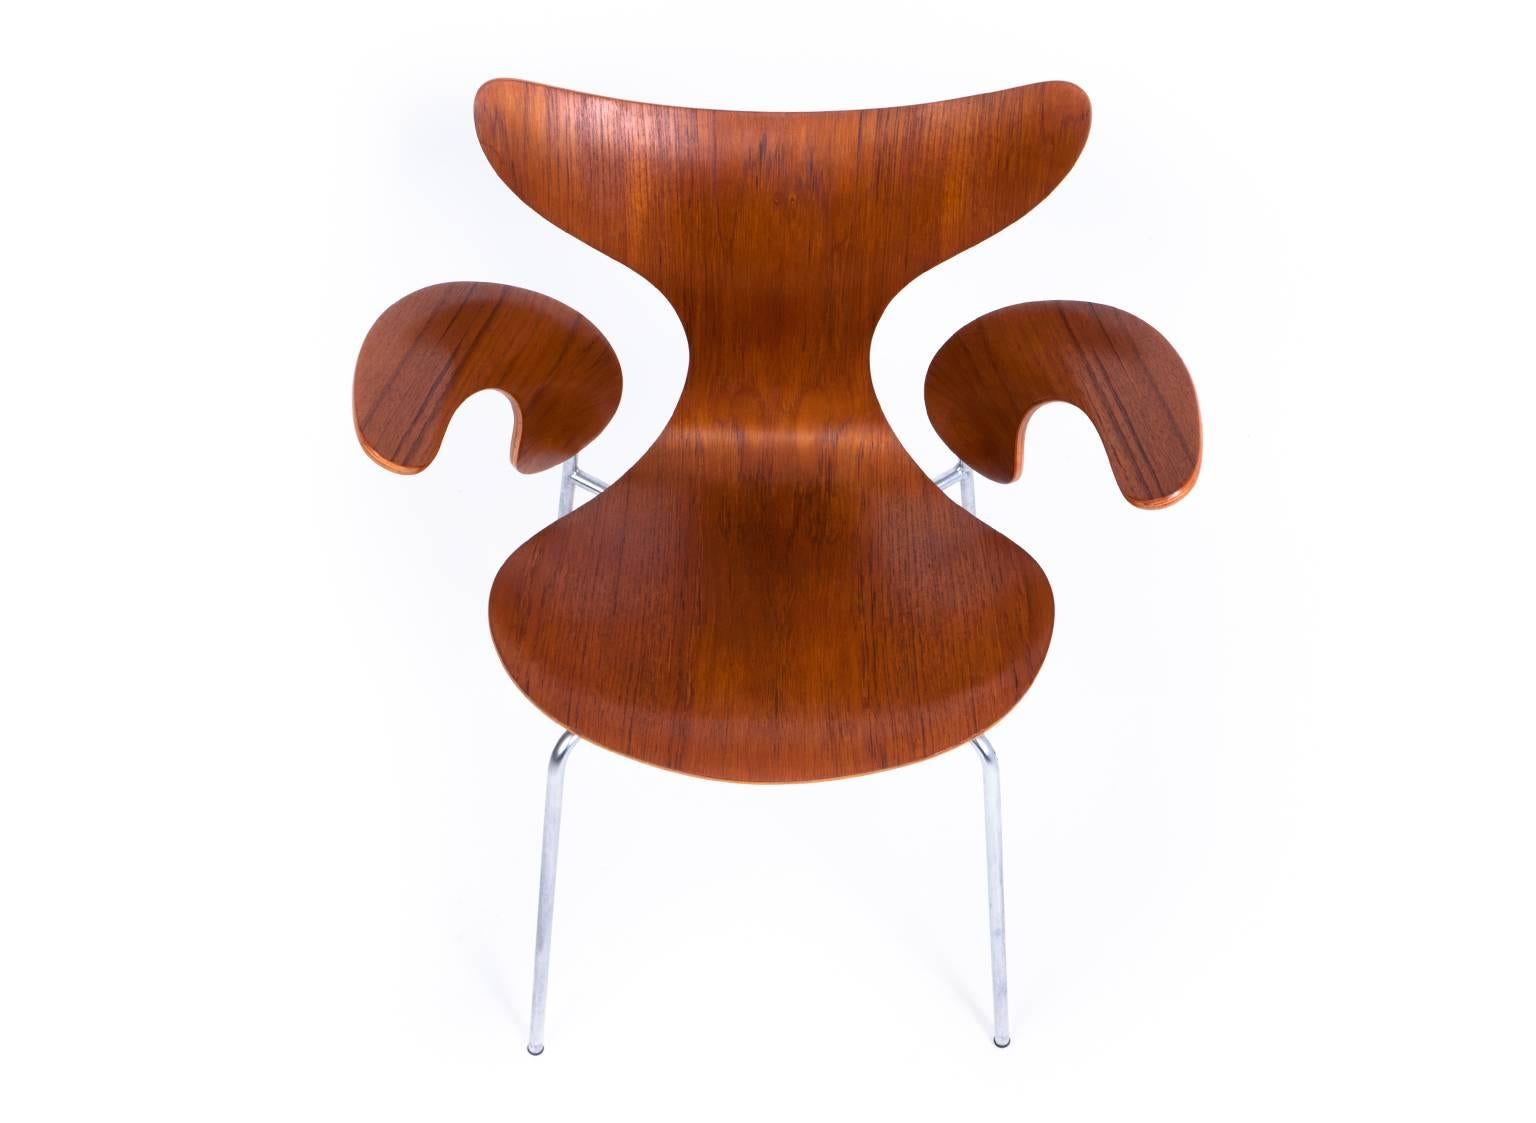 20th Century Arne Jacobsen Set of 12 Seagull Chairs in Teak For Sale